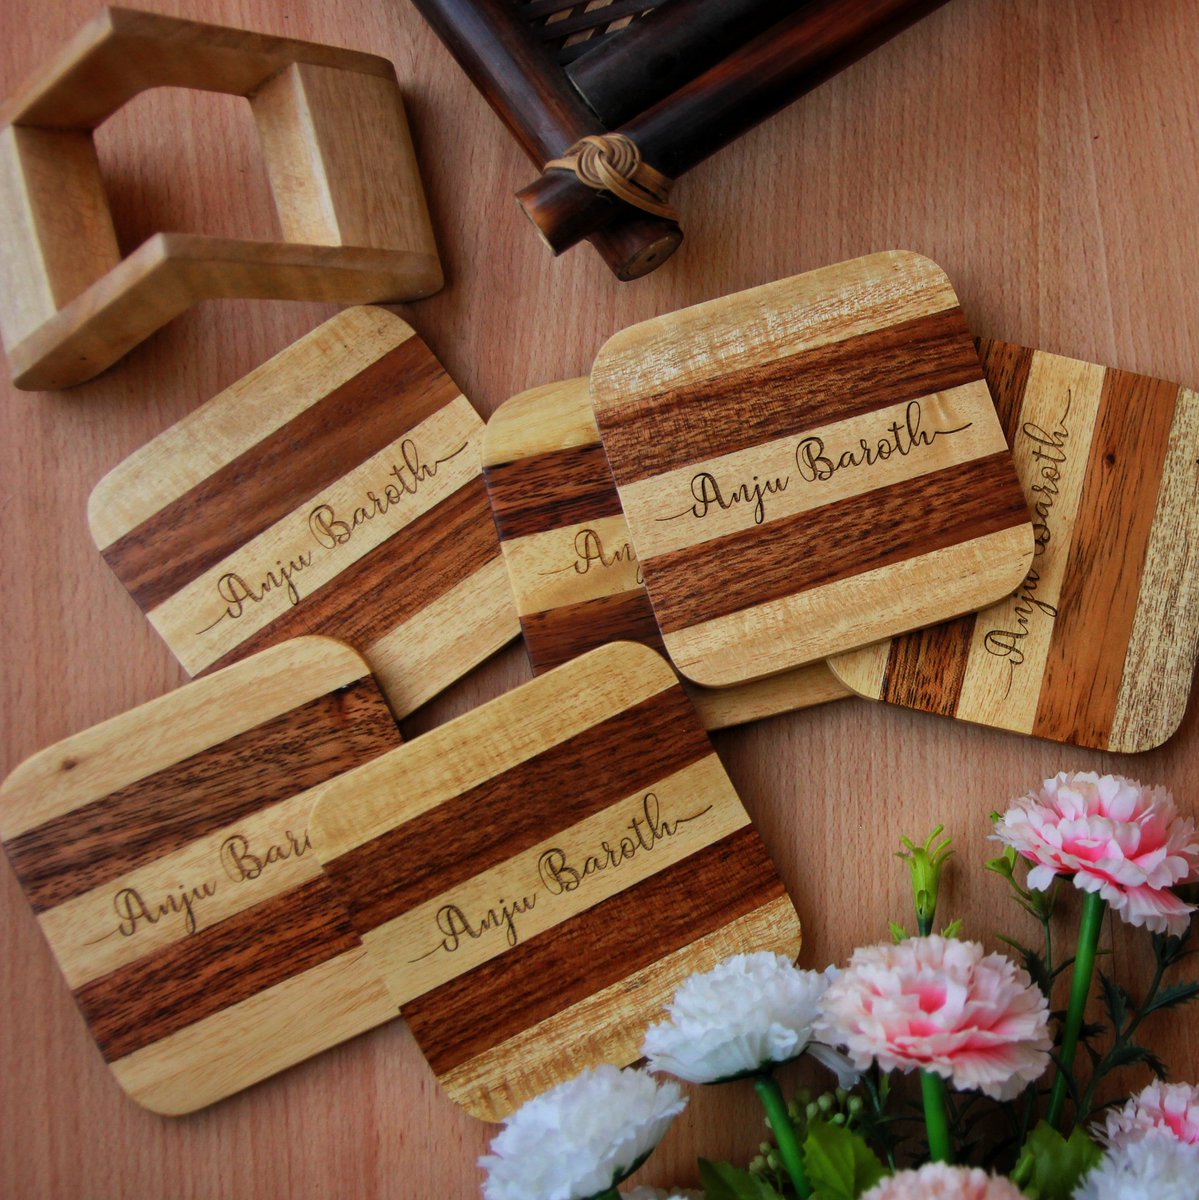 These table coasters customized with names are great home accessories to personalize your home decor.
#woodgeek #woodgeekstore #coasters #woodencoasters #coasterset #teacoasters #coffeecoasters #homedecor #housewarminggift #homedecorgifts #personalisedgifts  #woodworking